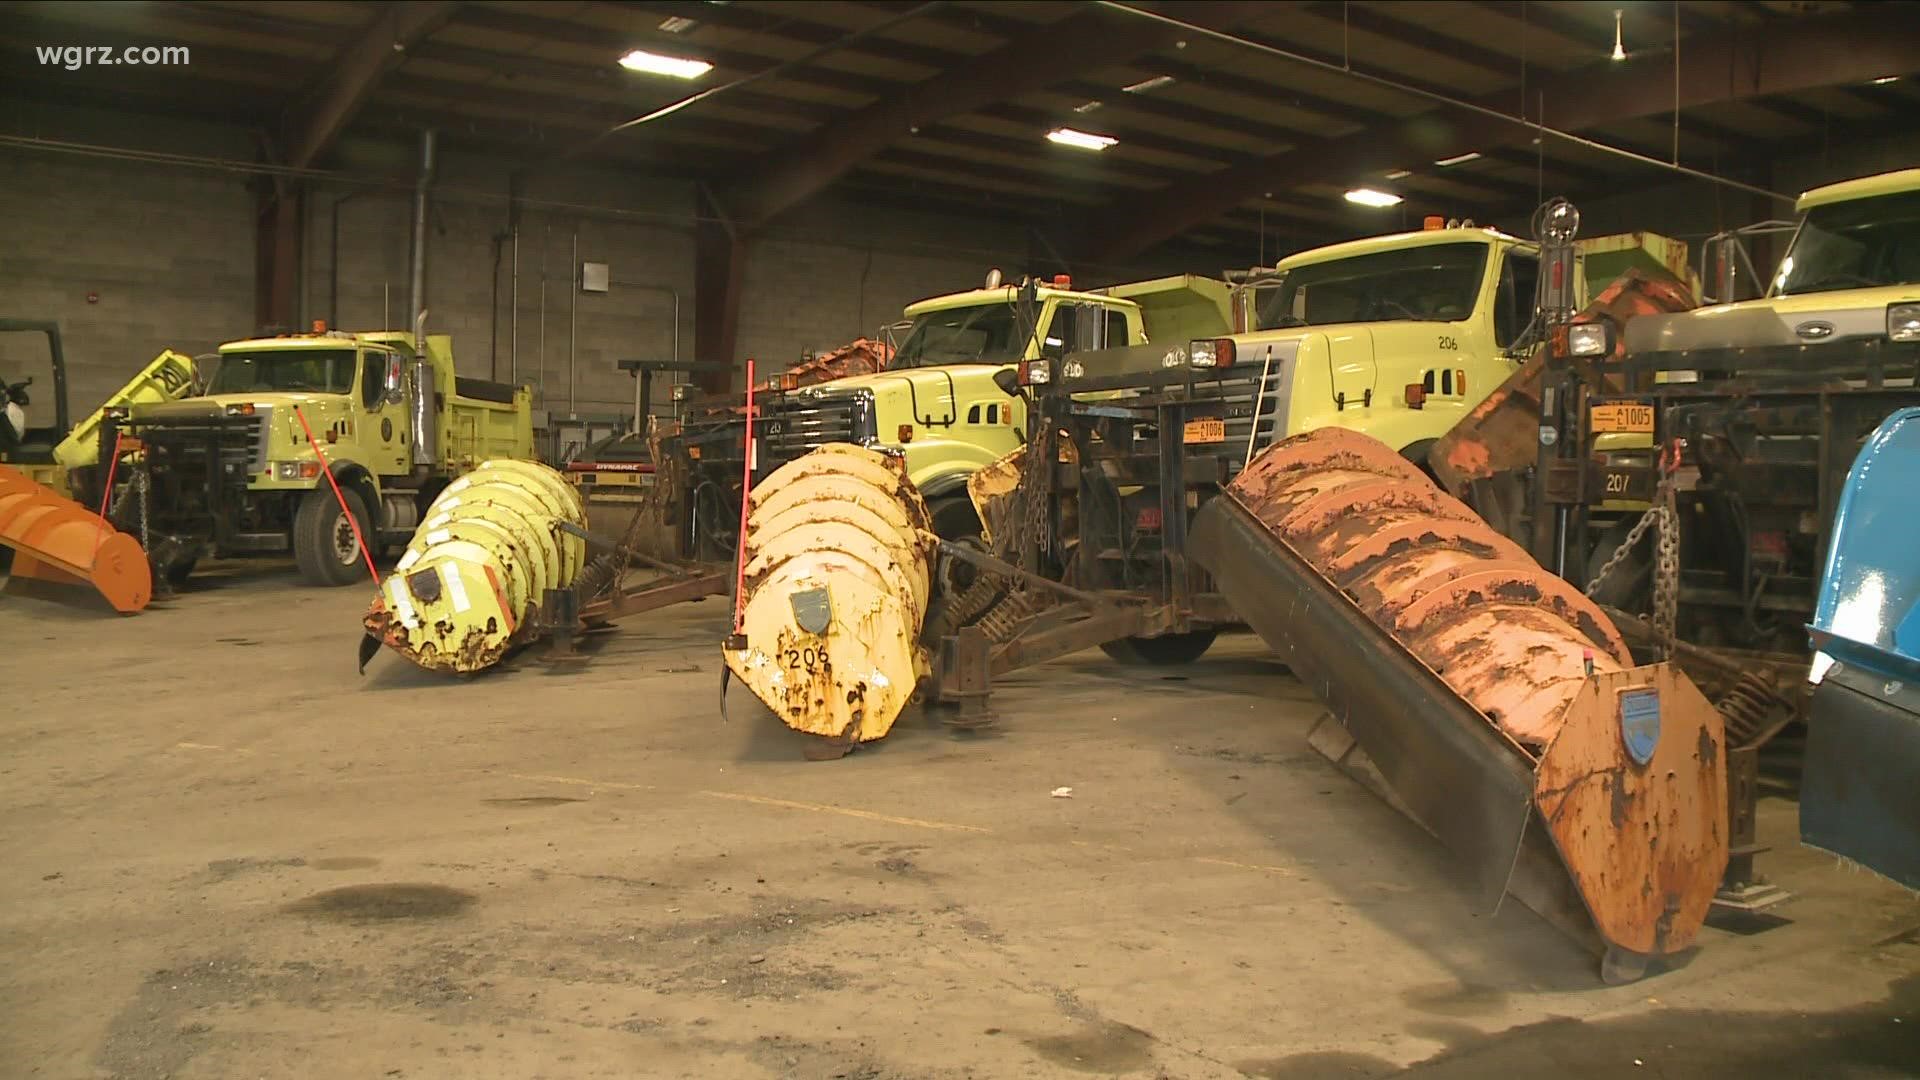 Plow drivers ready for more snow